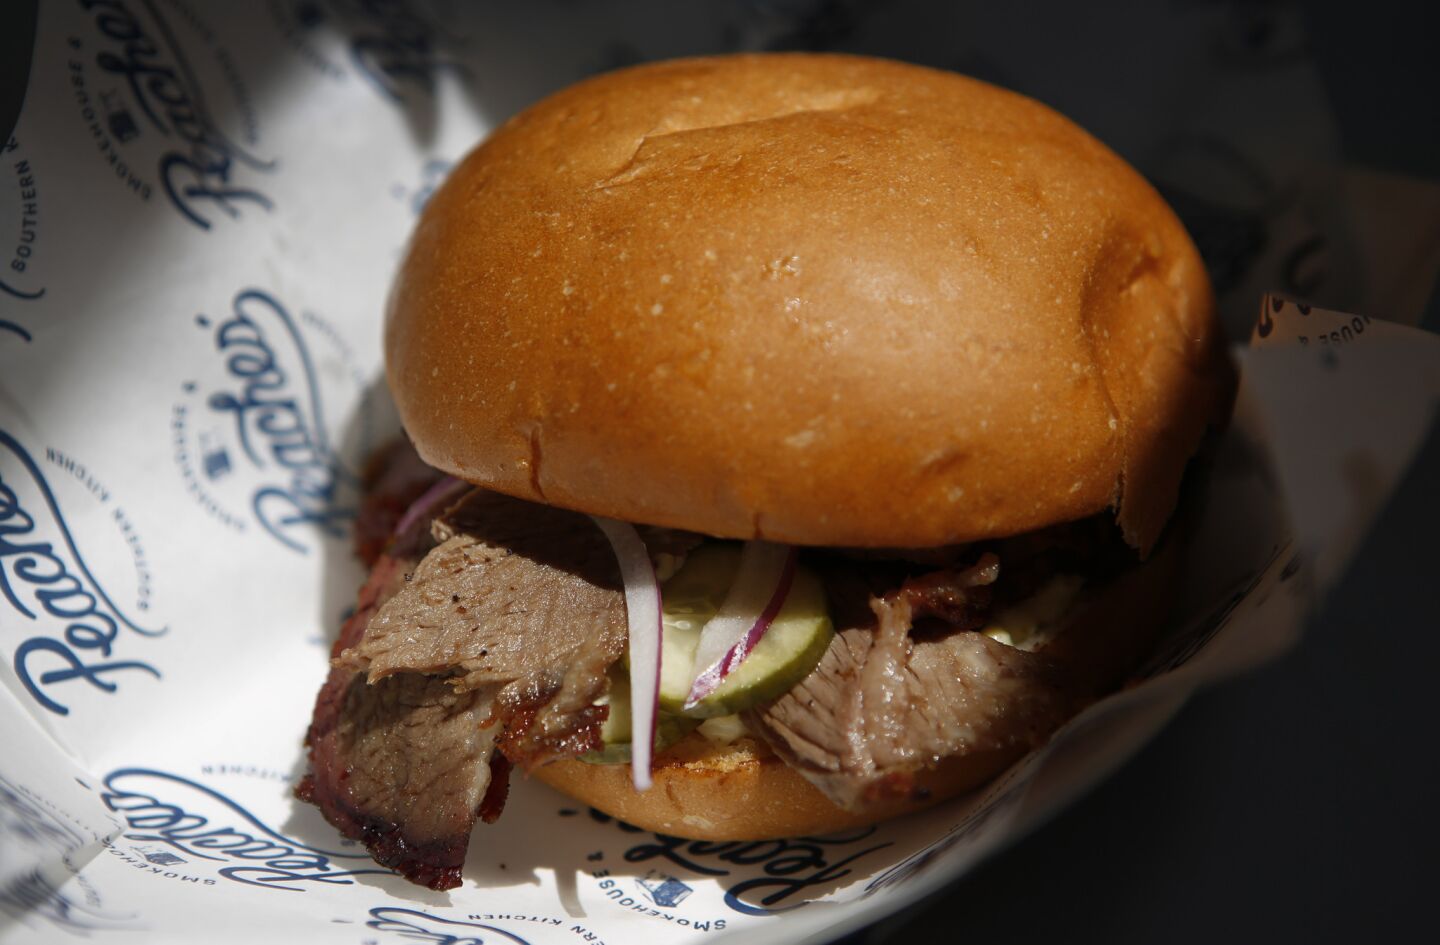 The brisket sandwich at Peaches', a food truck specializing in Southern food.